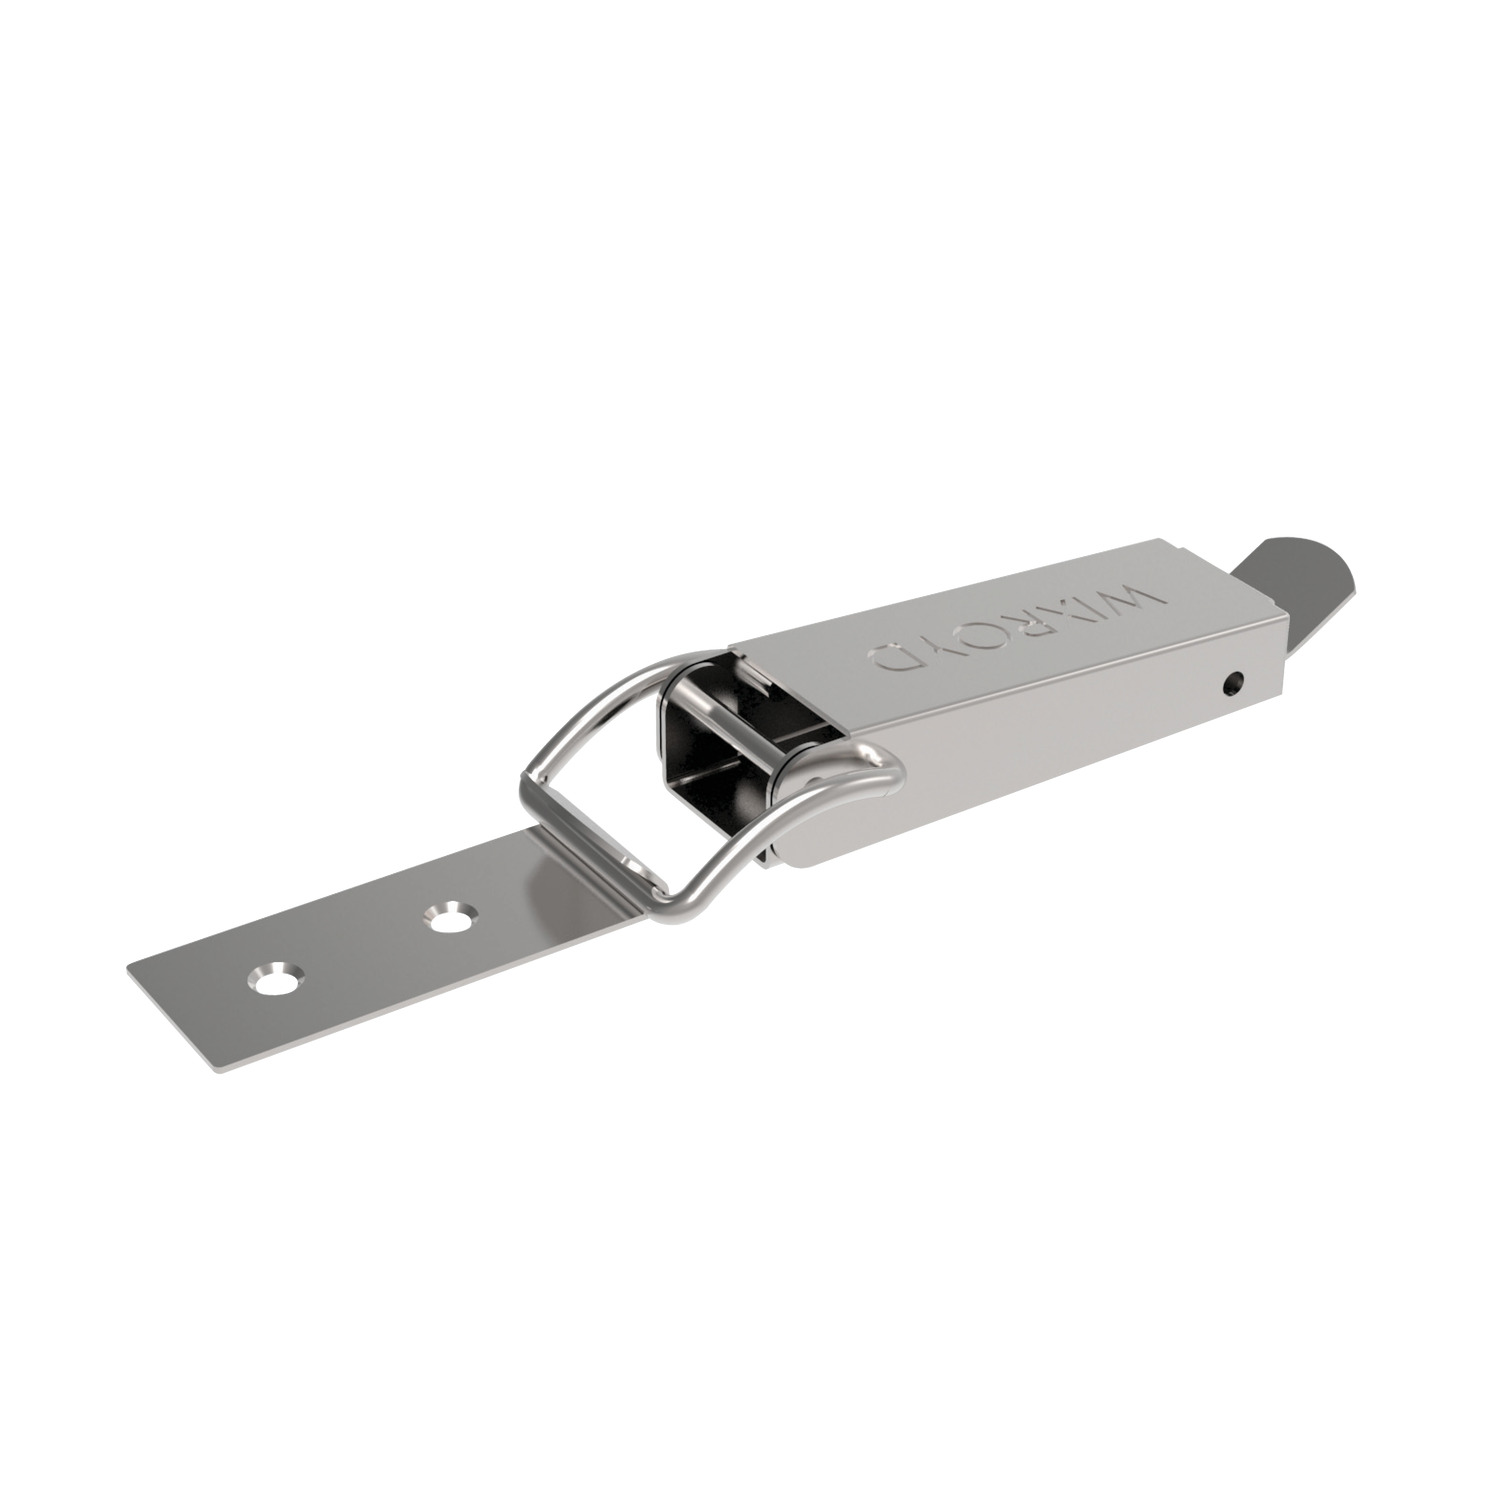 Toggle Latches Steel and stainless steel toggle latches available. Overall length of 193.5mm. Available and in stock today.